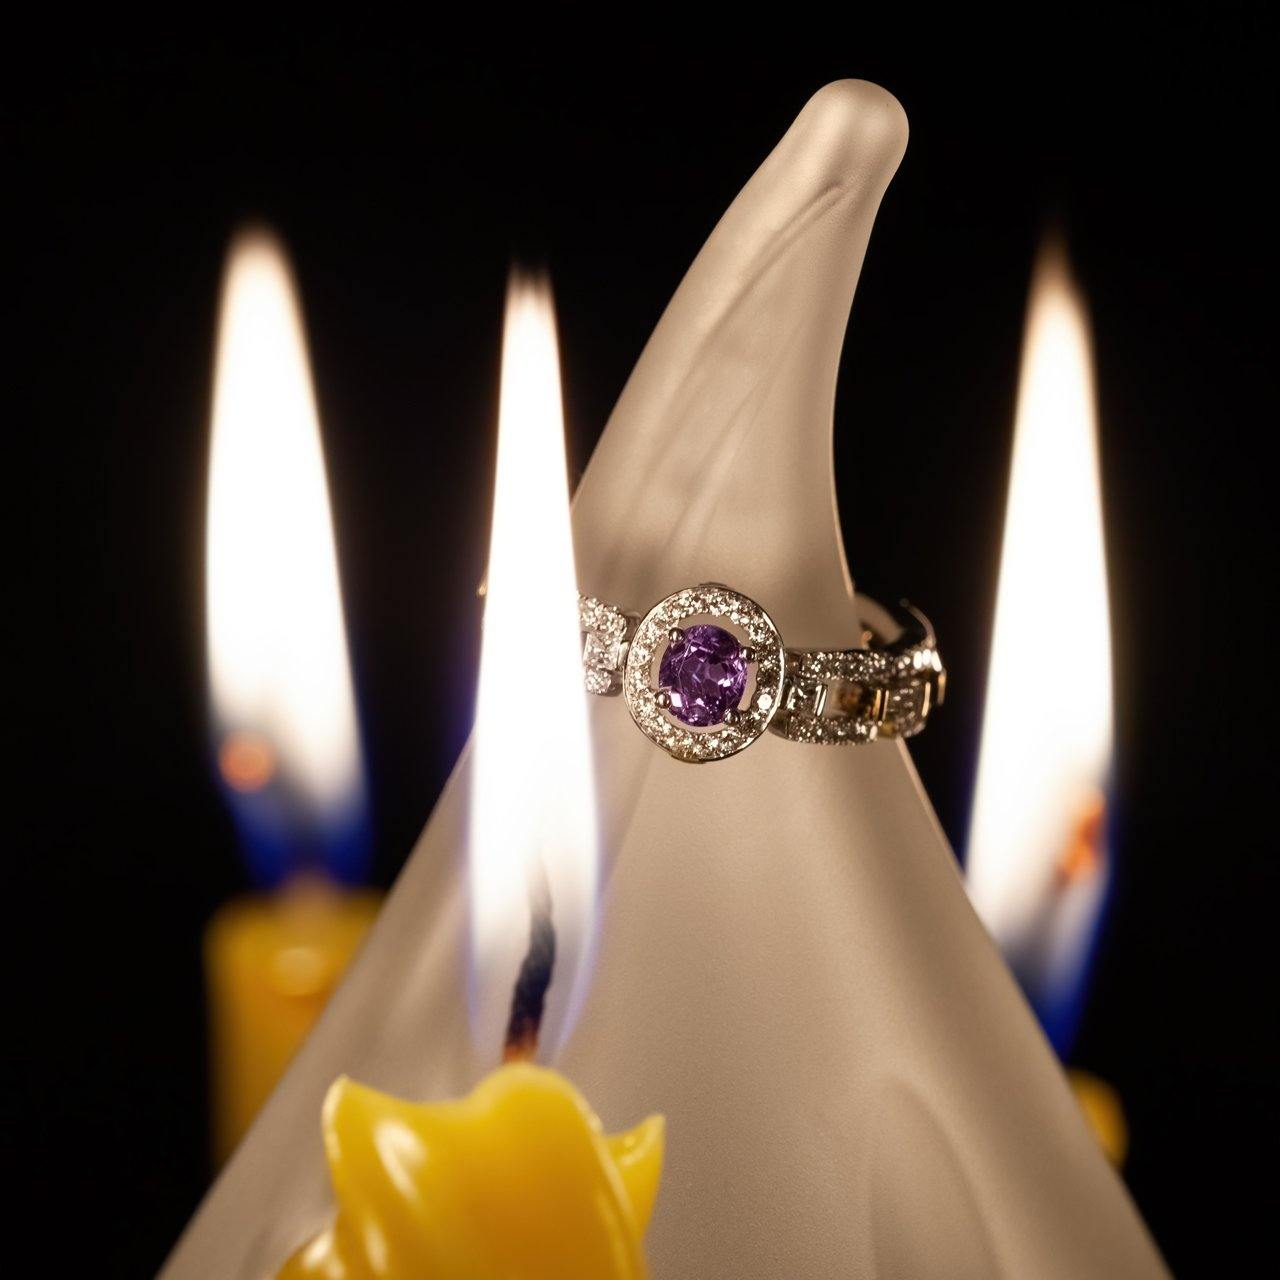 18k gold wedding ring showcasing a 0.40ct alexandrite on a candlelit background